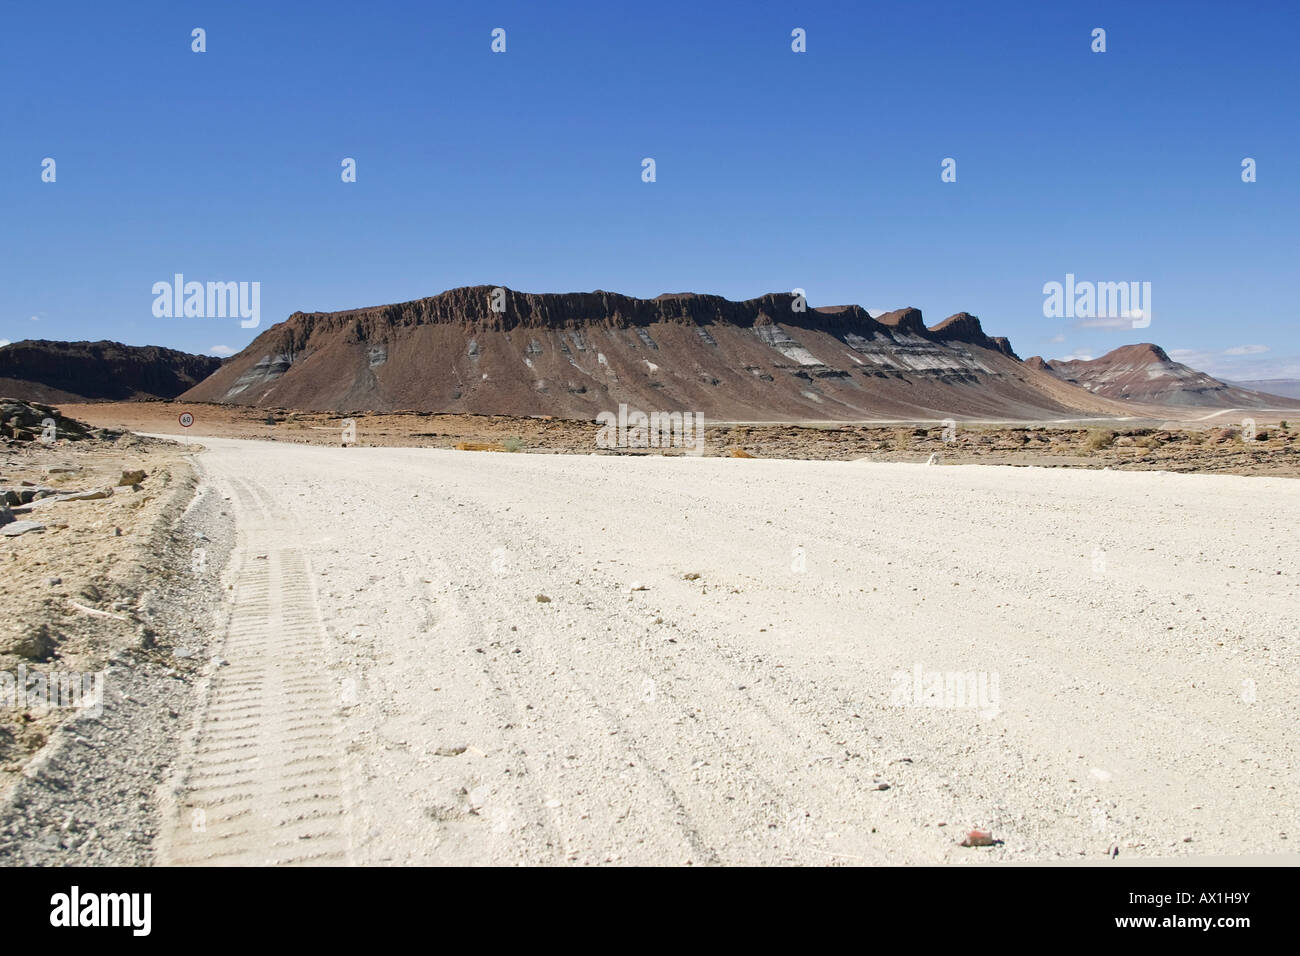 Gravelroad in the South of Namibia, Africa Stock Photo